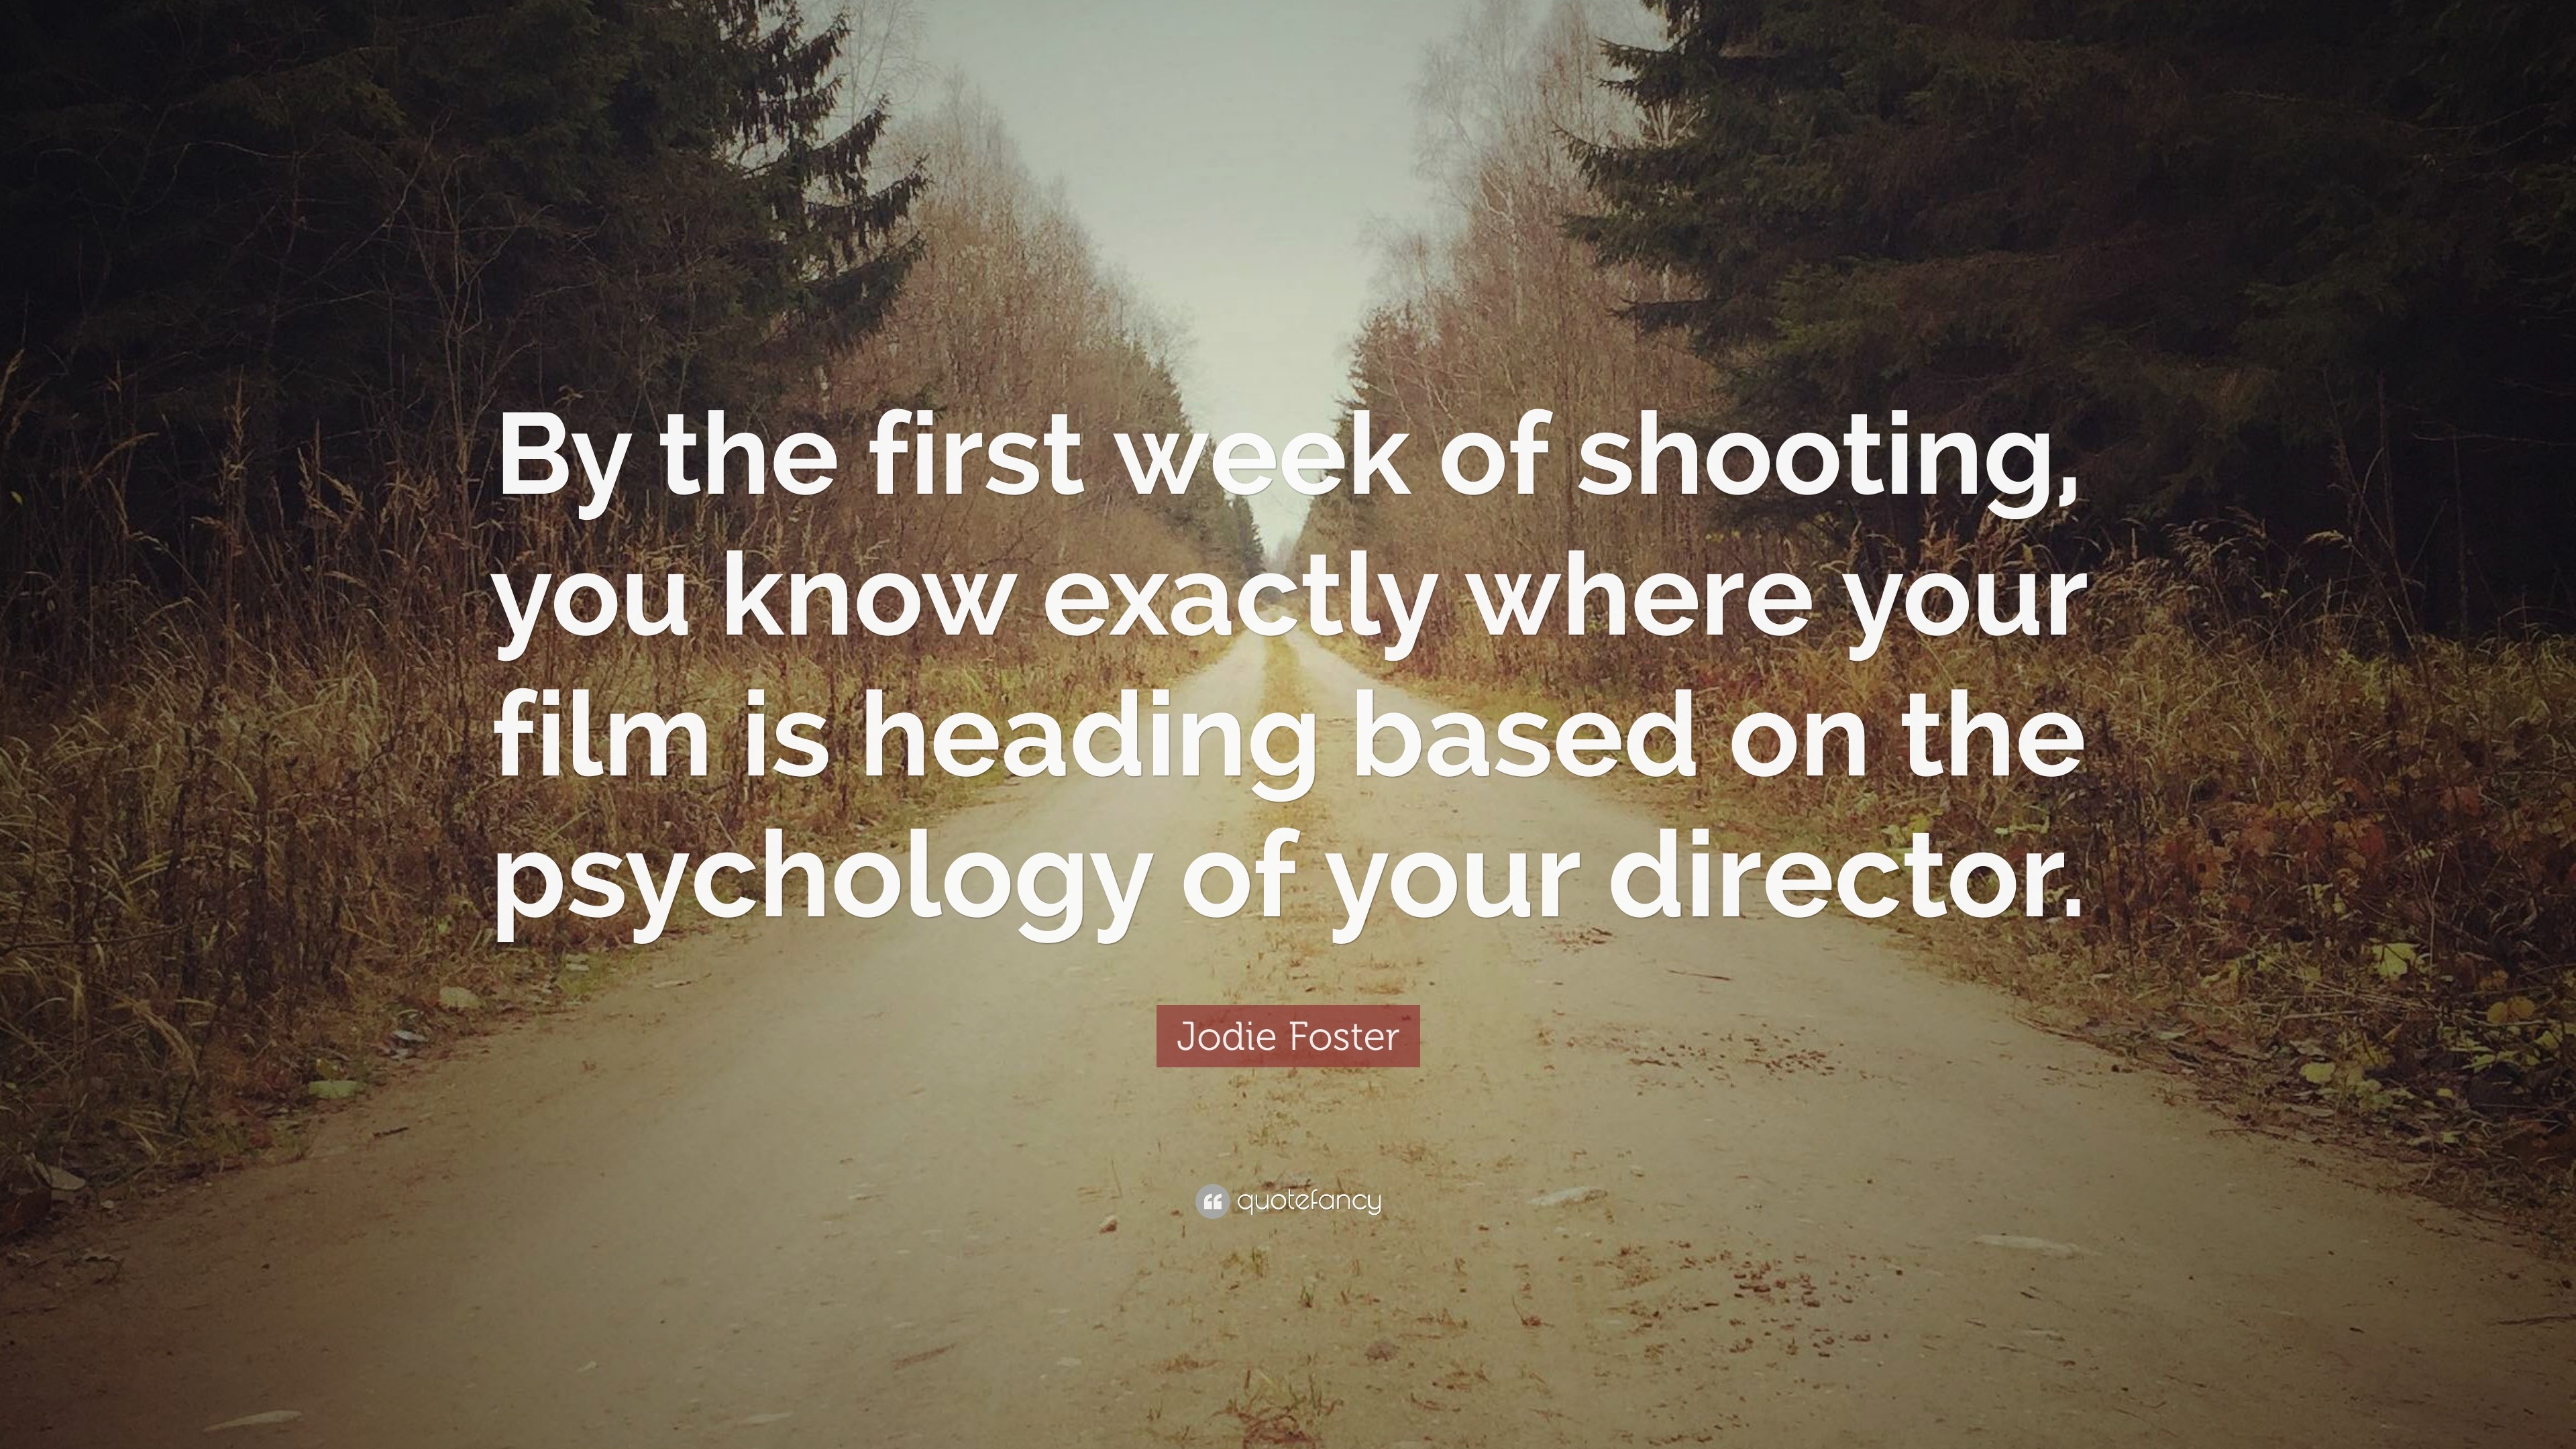 Jodie Foster Quote: "By the first week of shooting, you ...